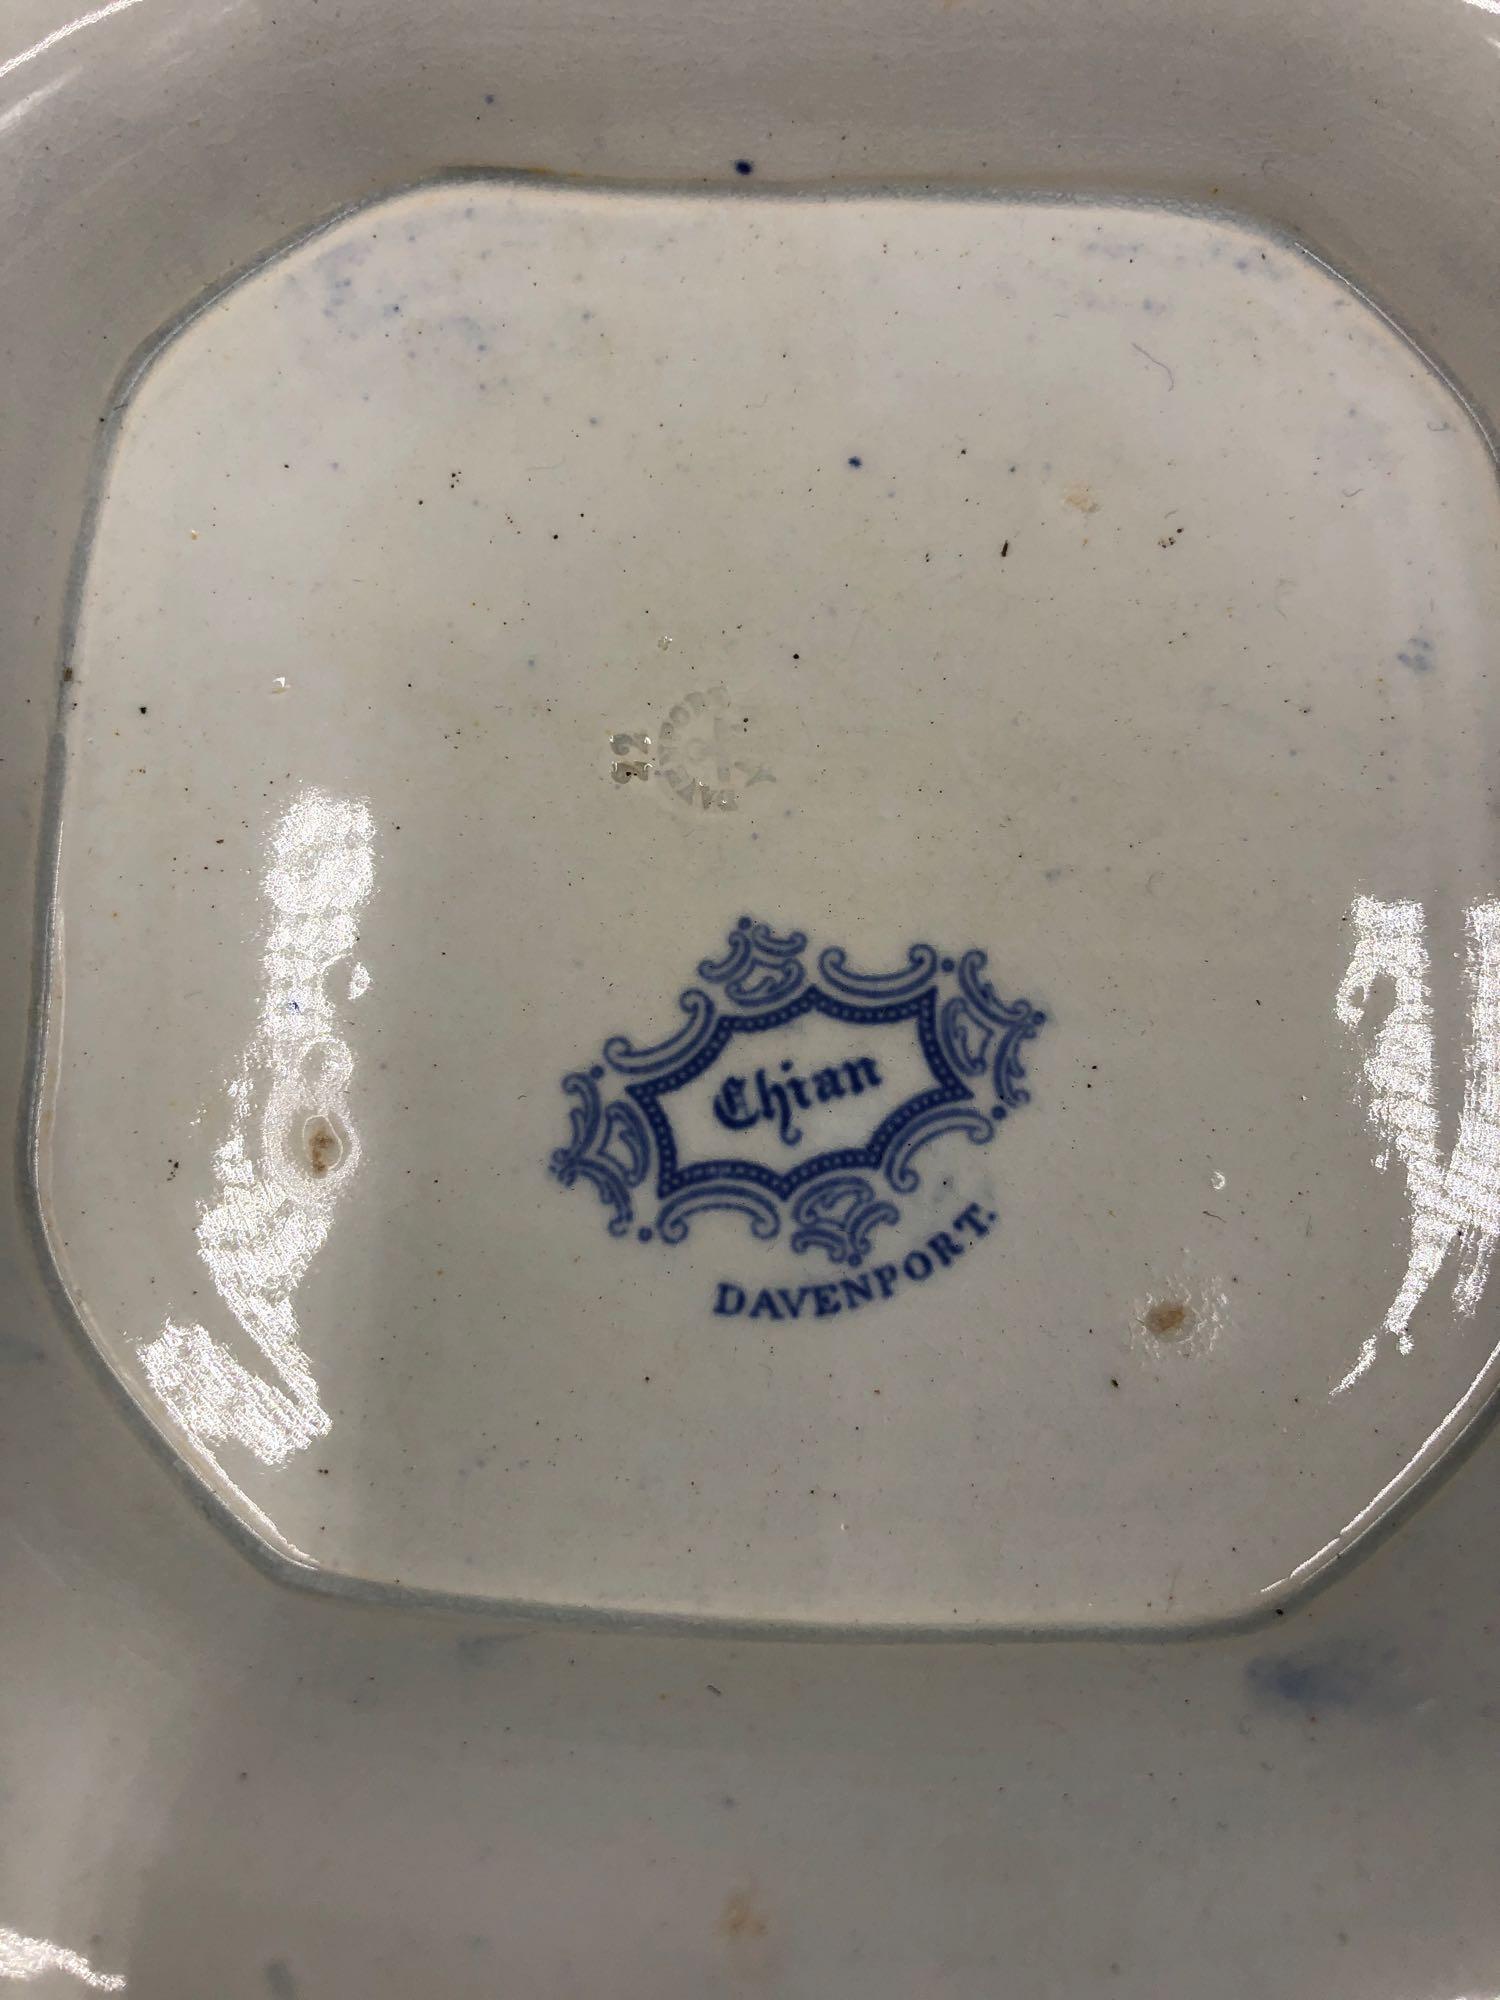 Blue Transfer Davenport China Serving Dish with Lid